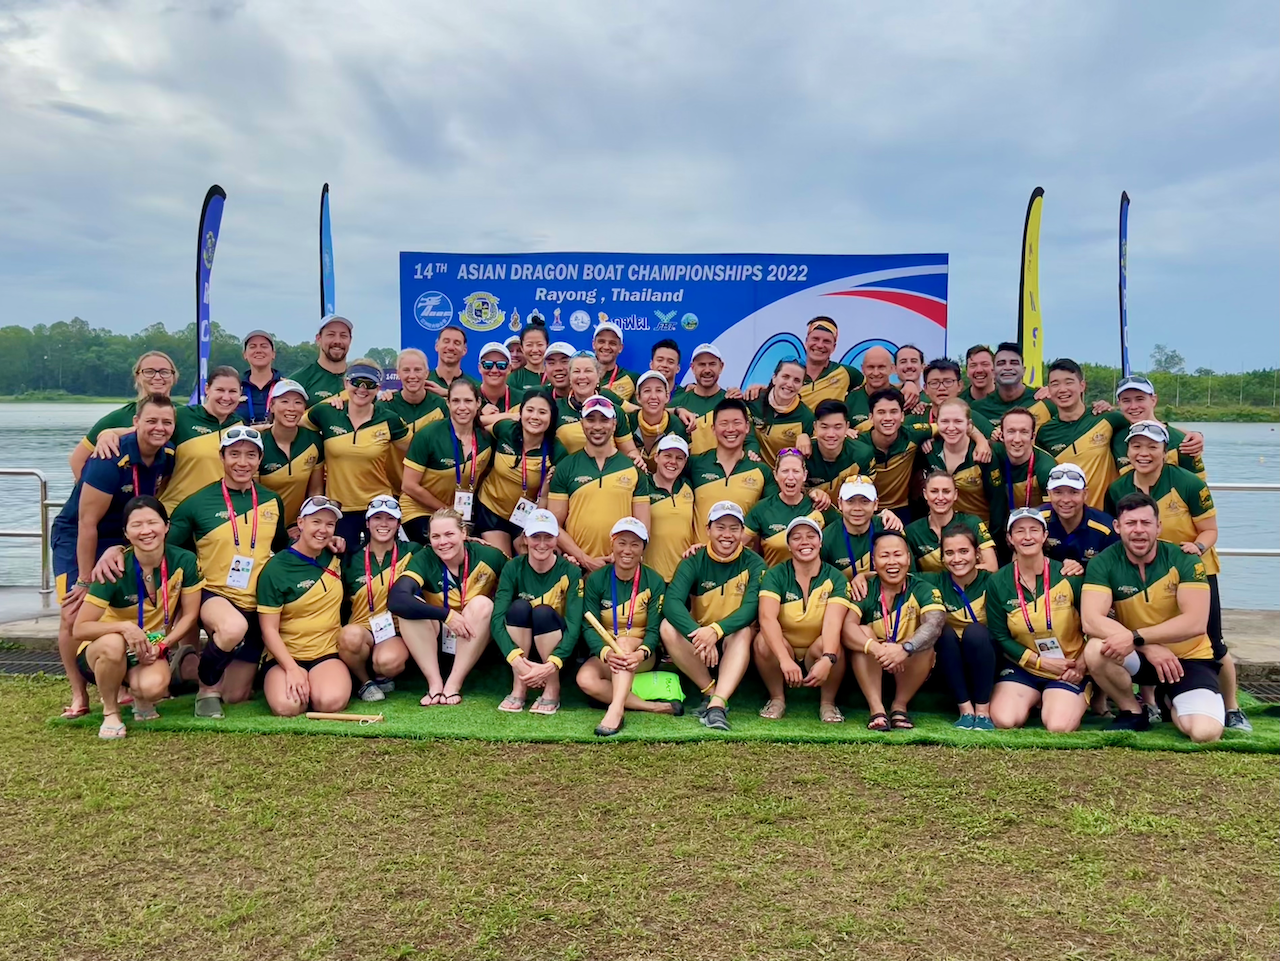 The Perpetual Auroras at the 14th Asain Dragon Boat Championships 2022 in Rayong, Thailand